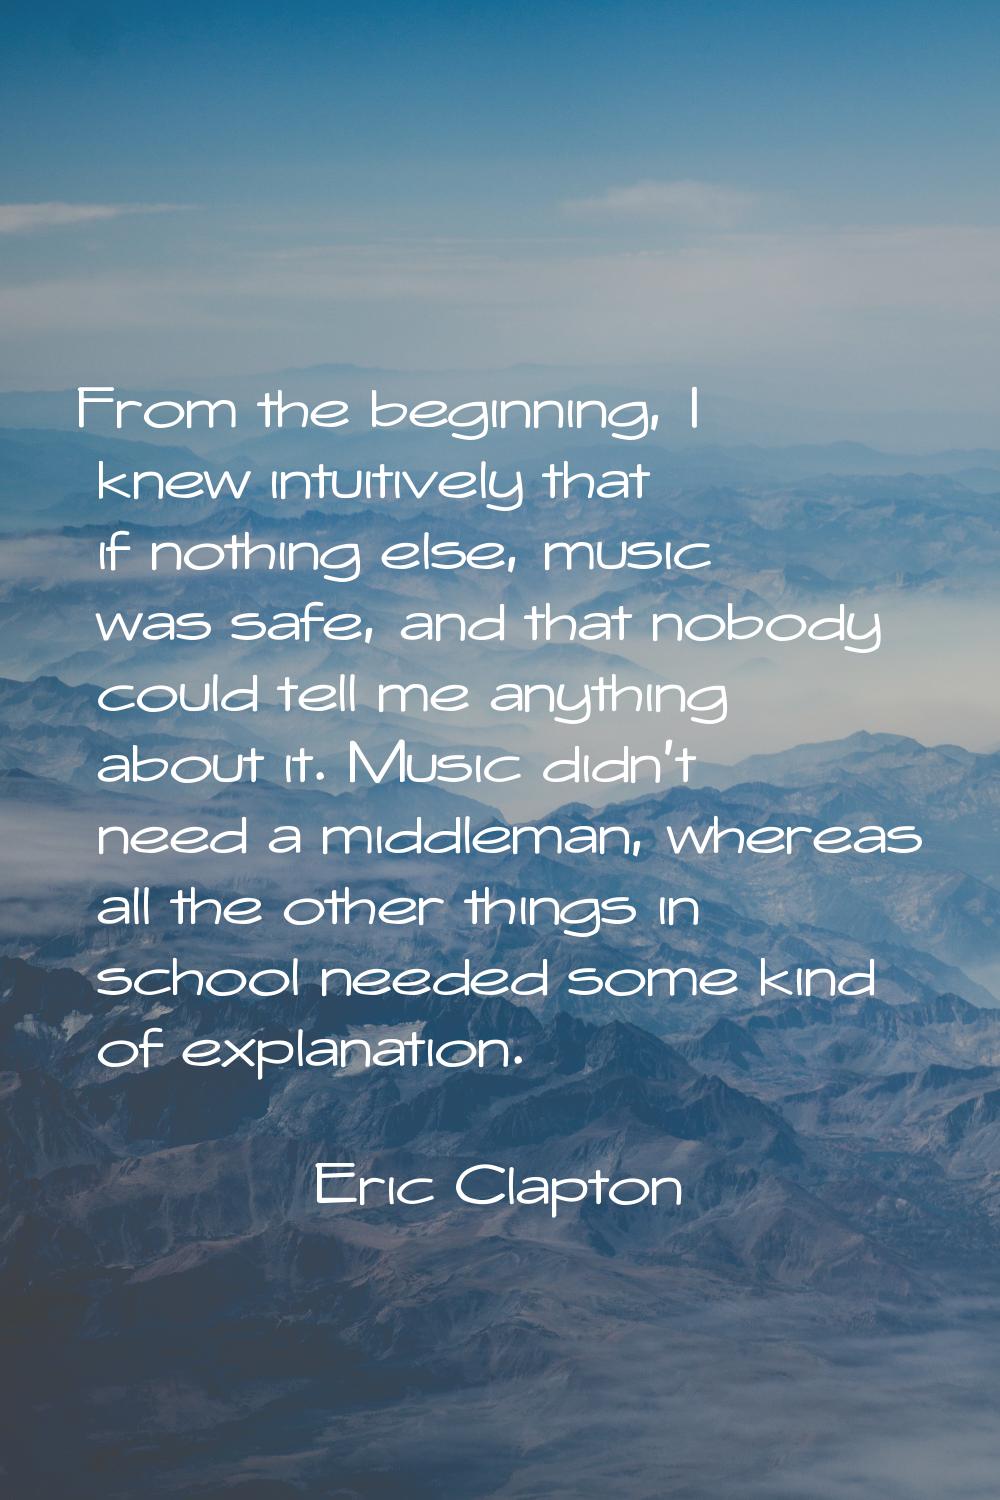 From the beginning, I knew intuitively that if nothing else, music was safe, and that nobody could 